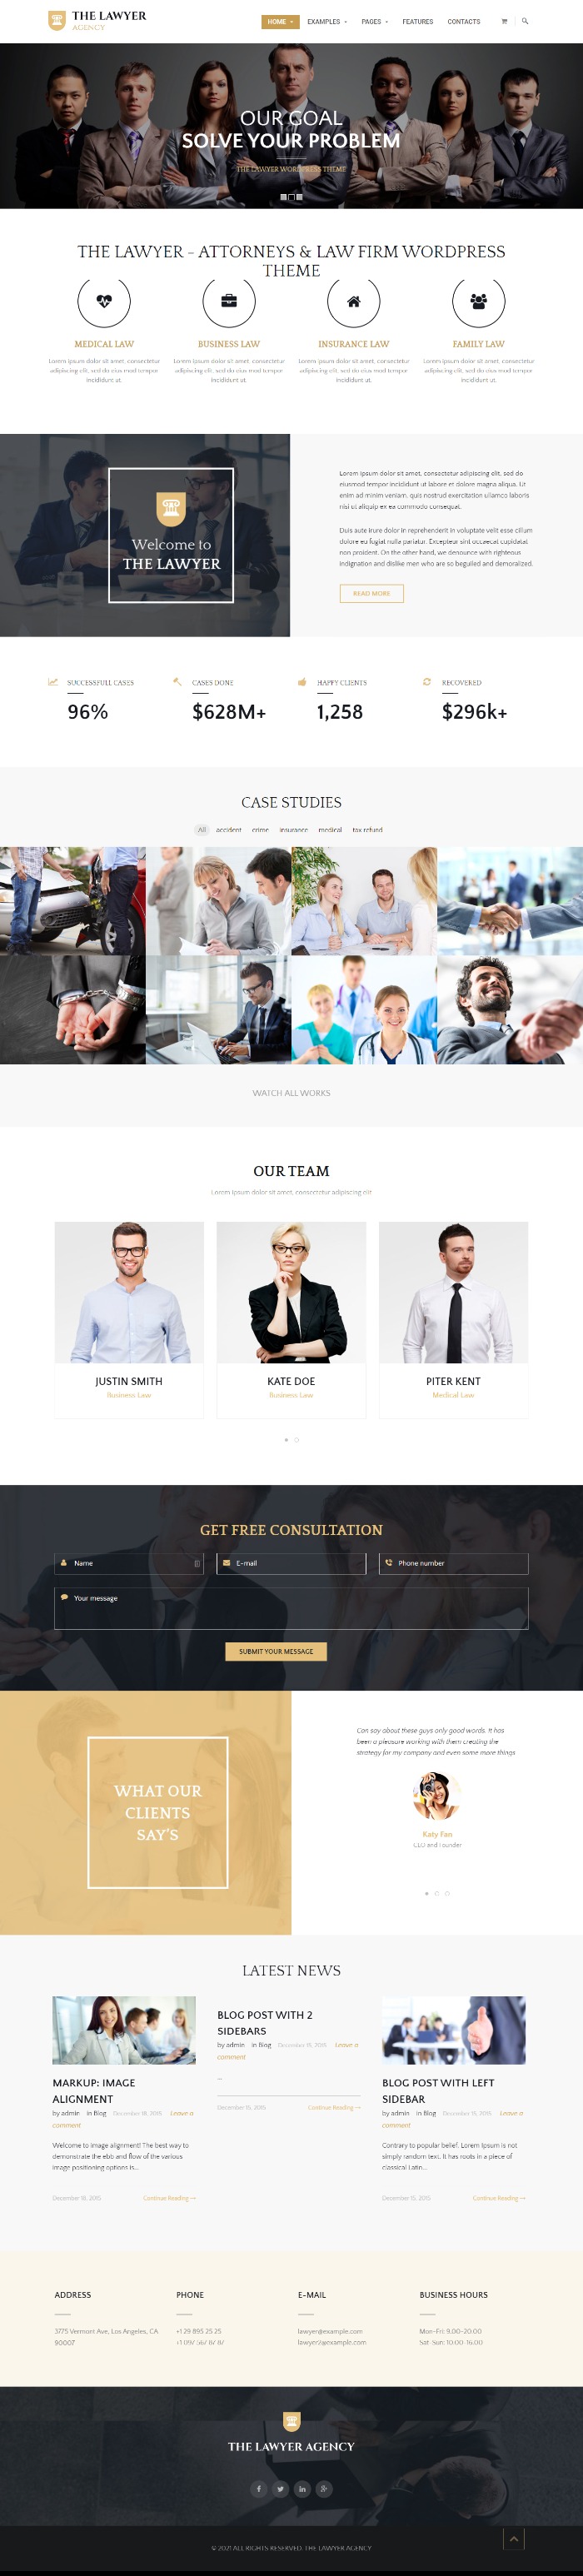 MẪU WEBSITE CÔNG TY LUẬT - THE LAWYER